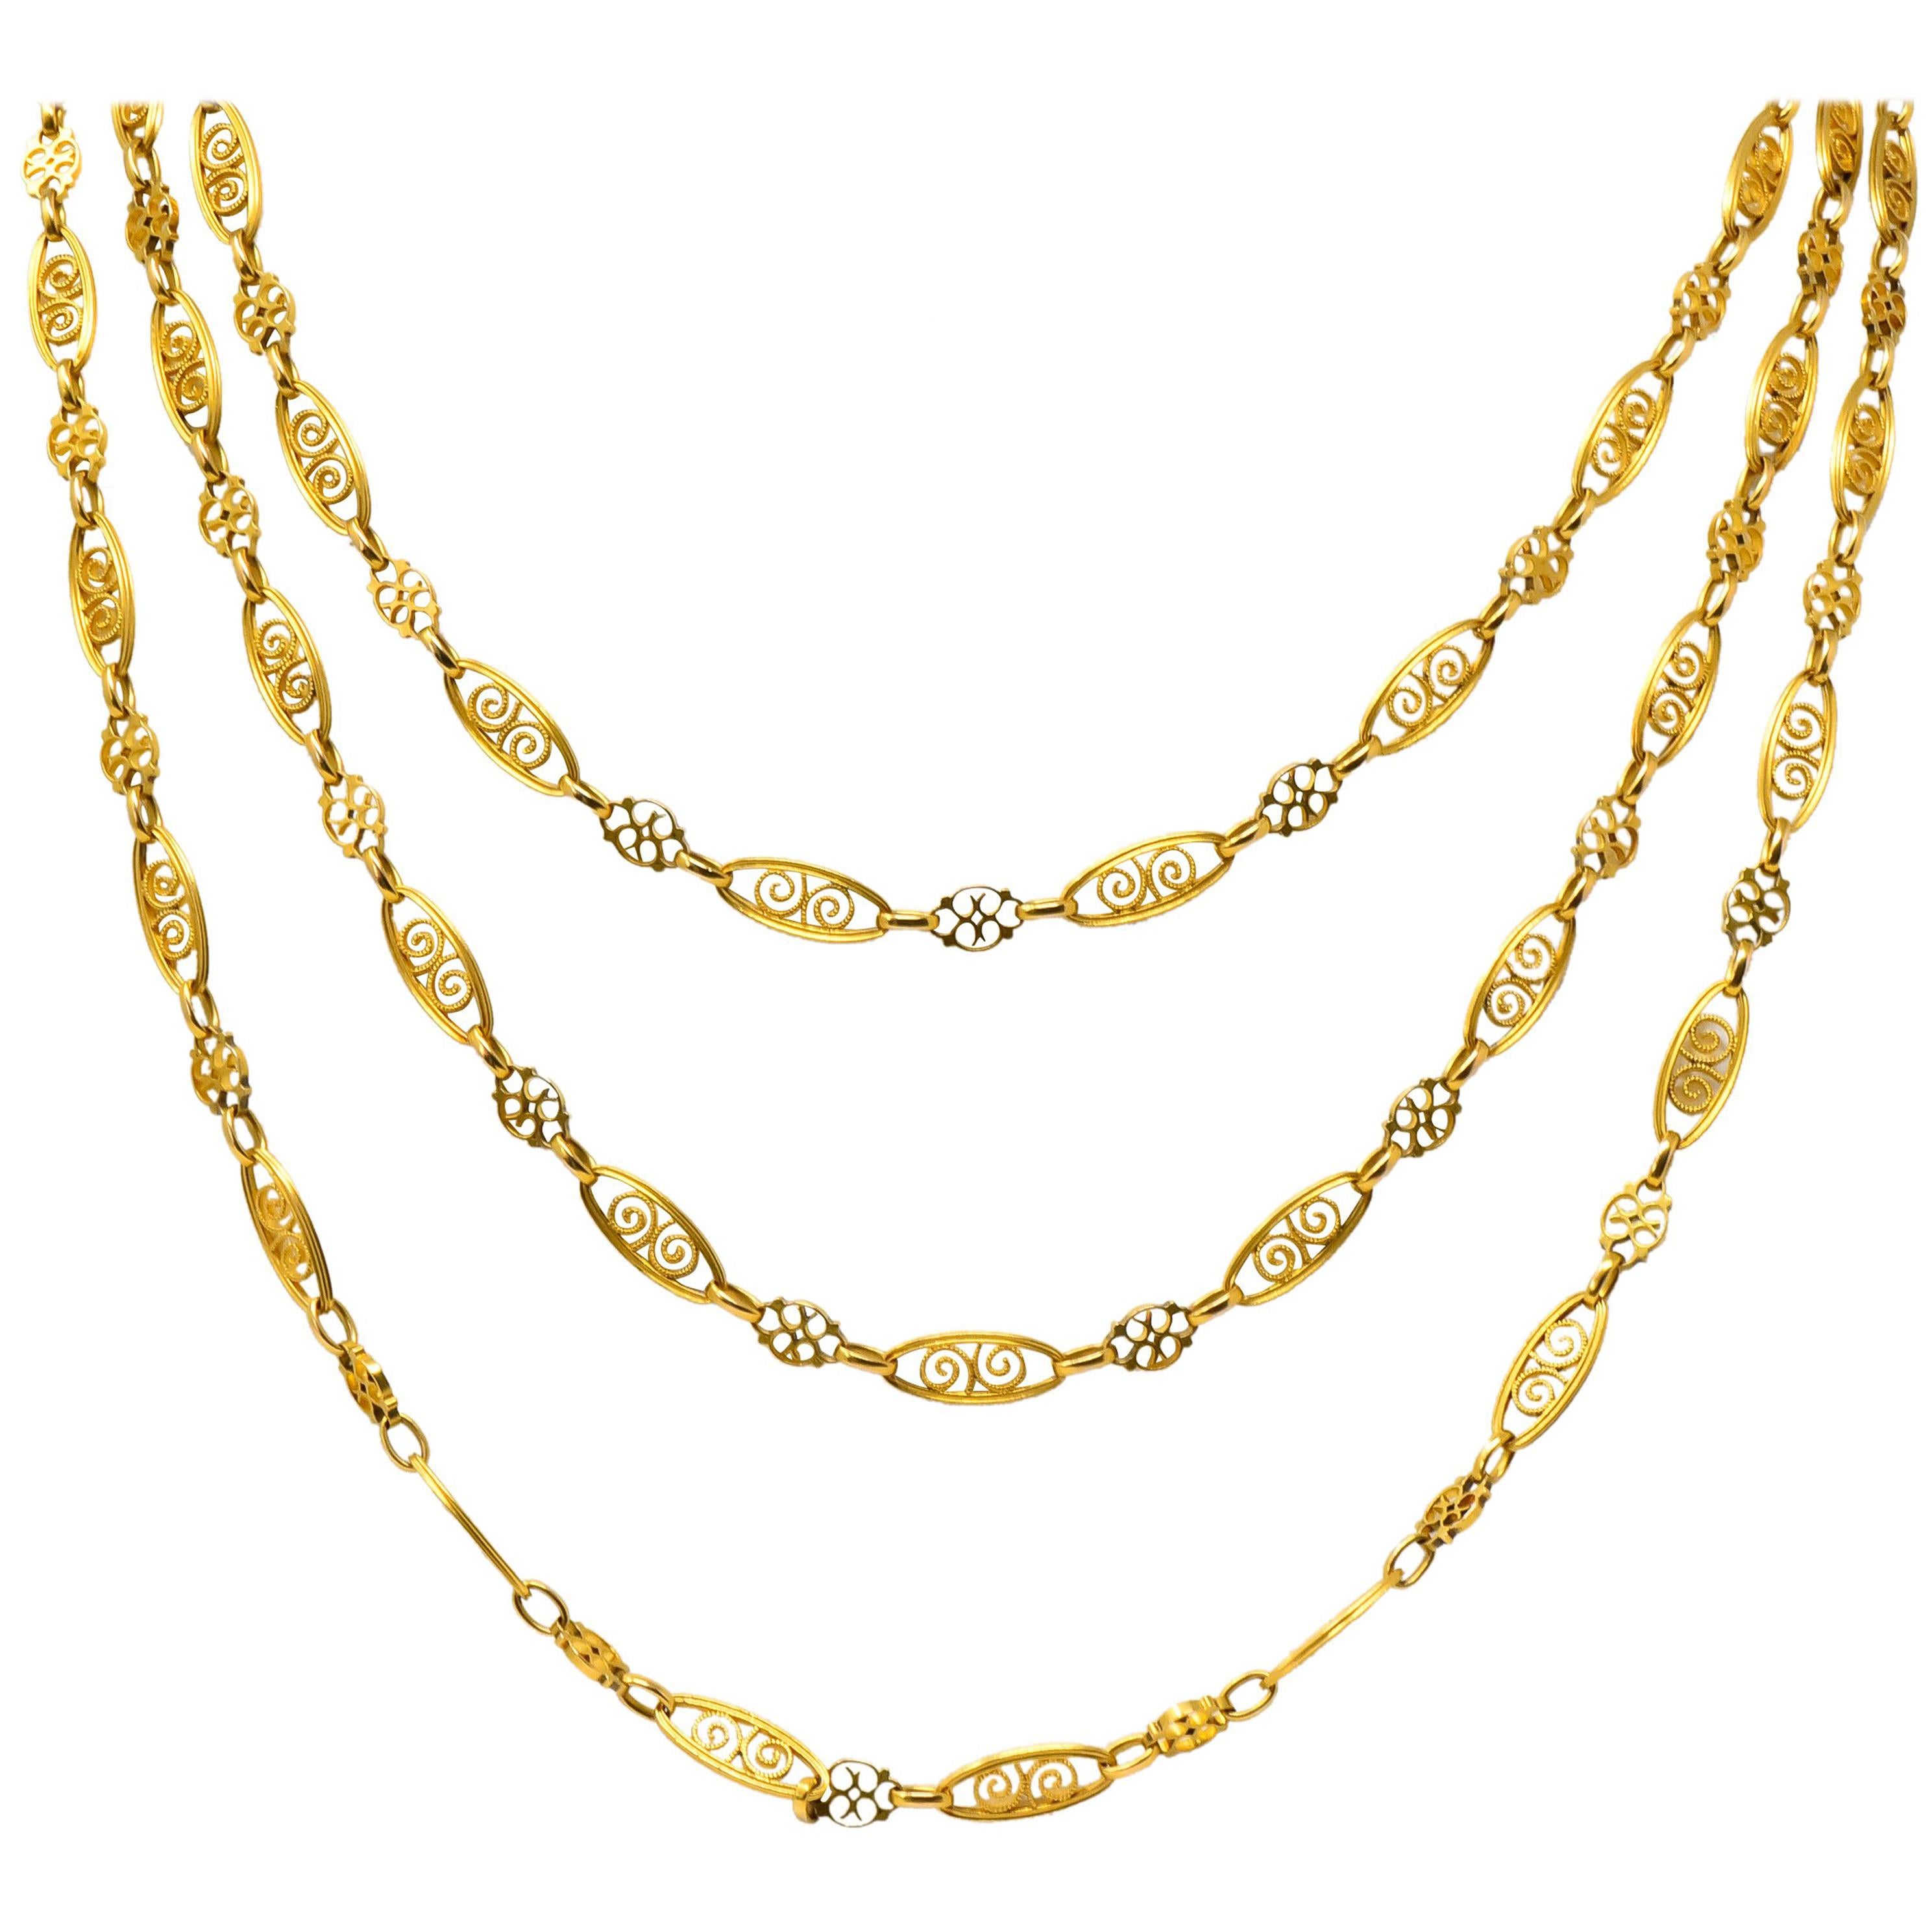 French Victorian 18 Karat Gold Fancy Long Chain Necklace